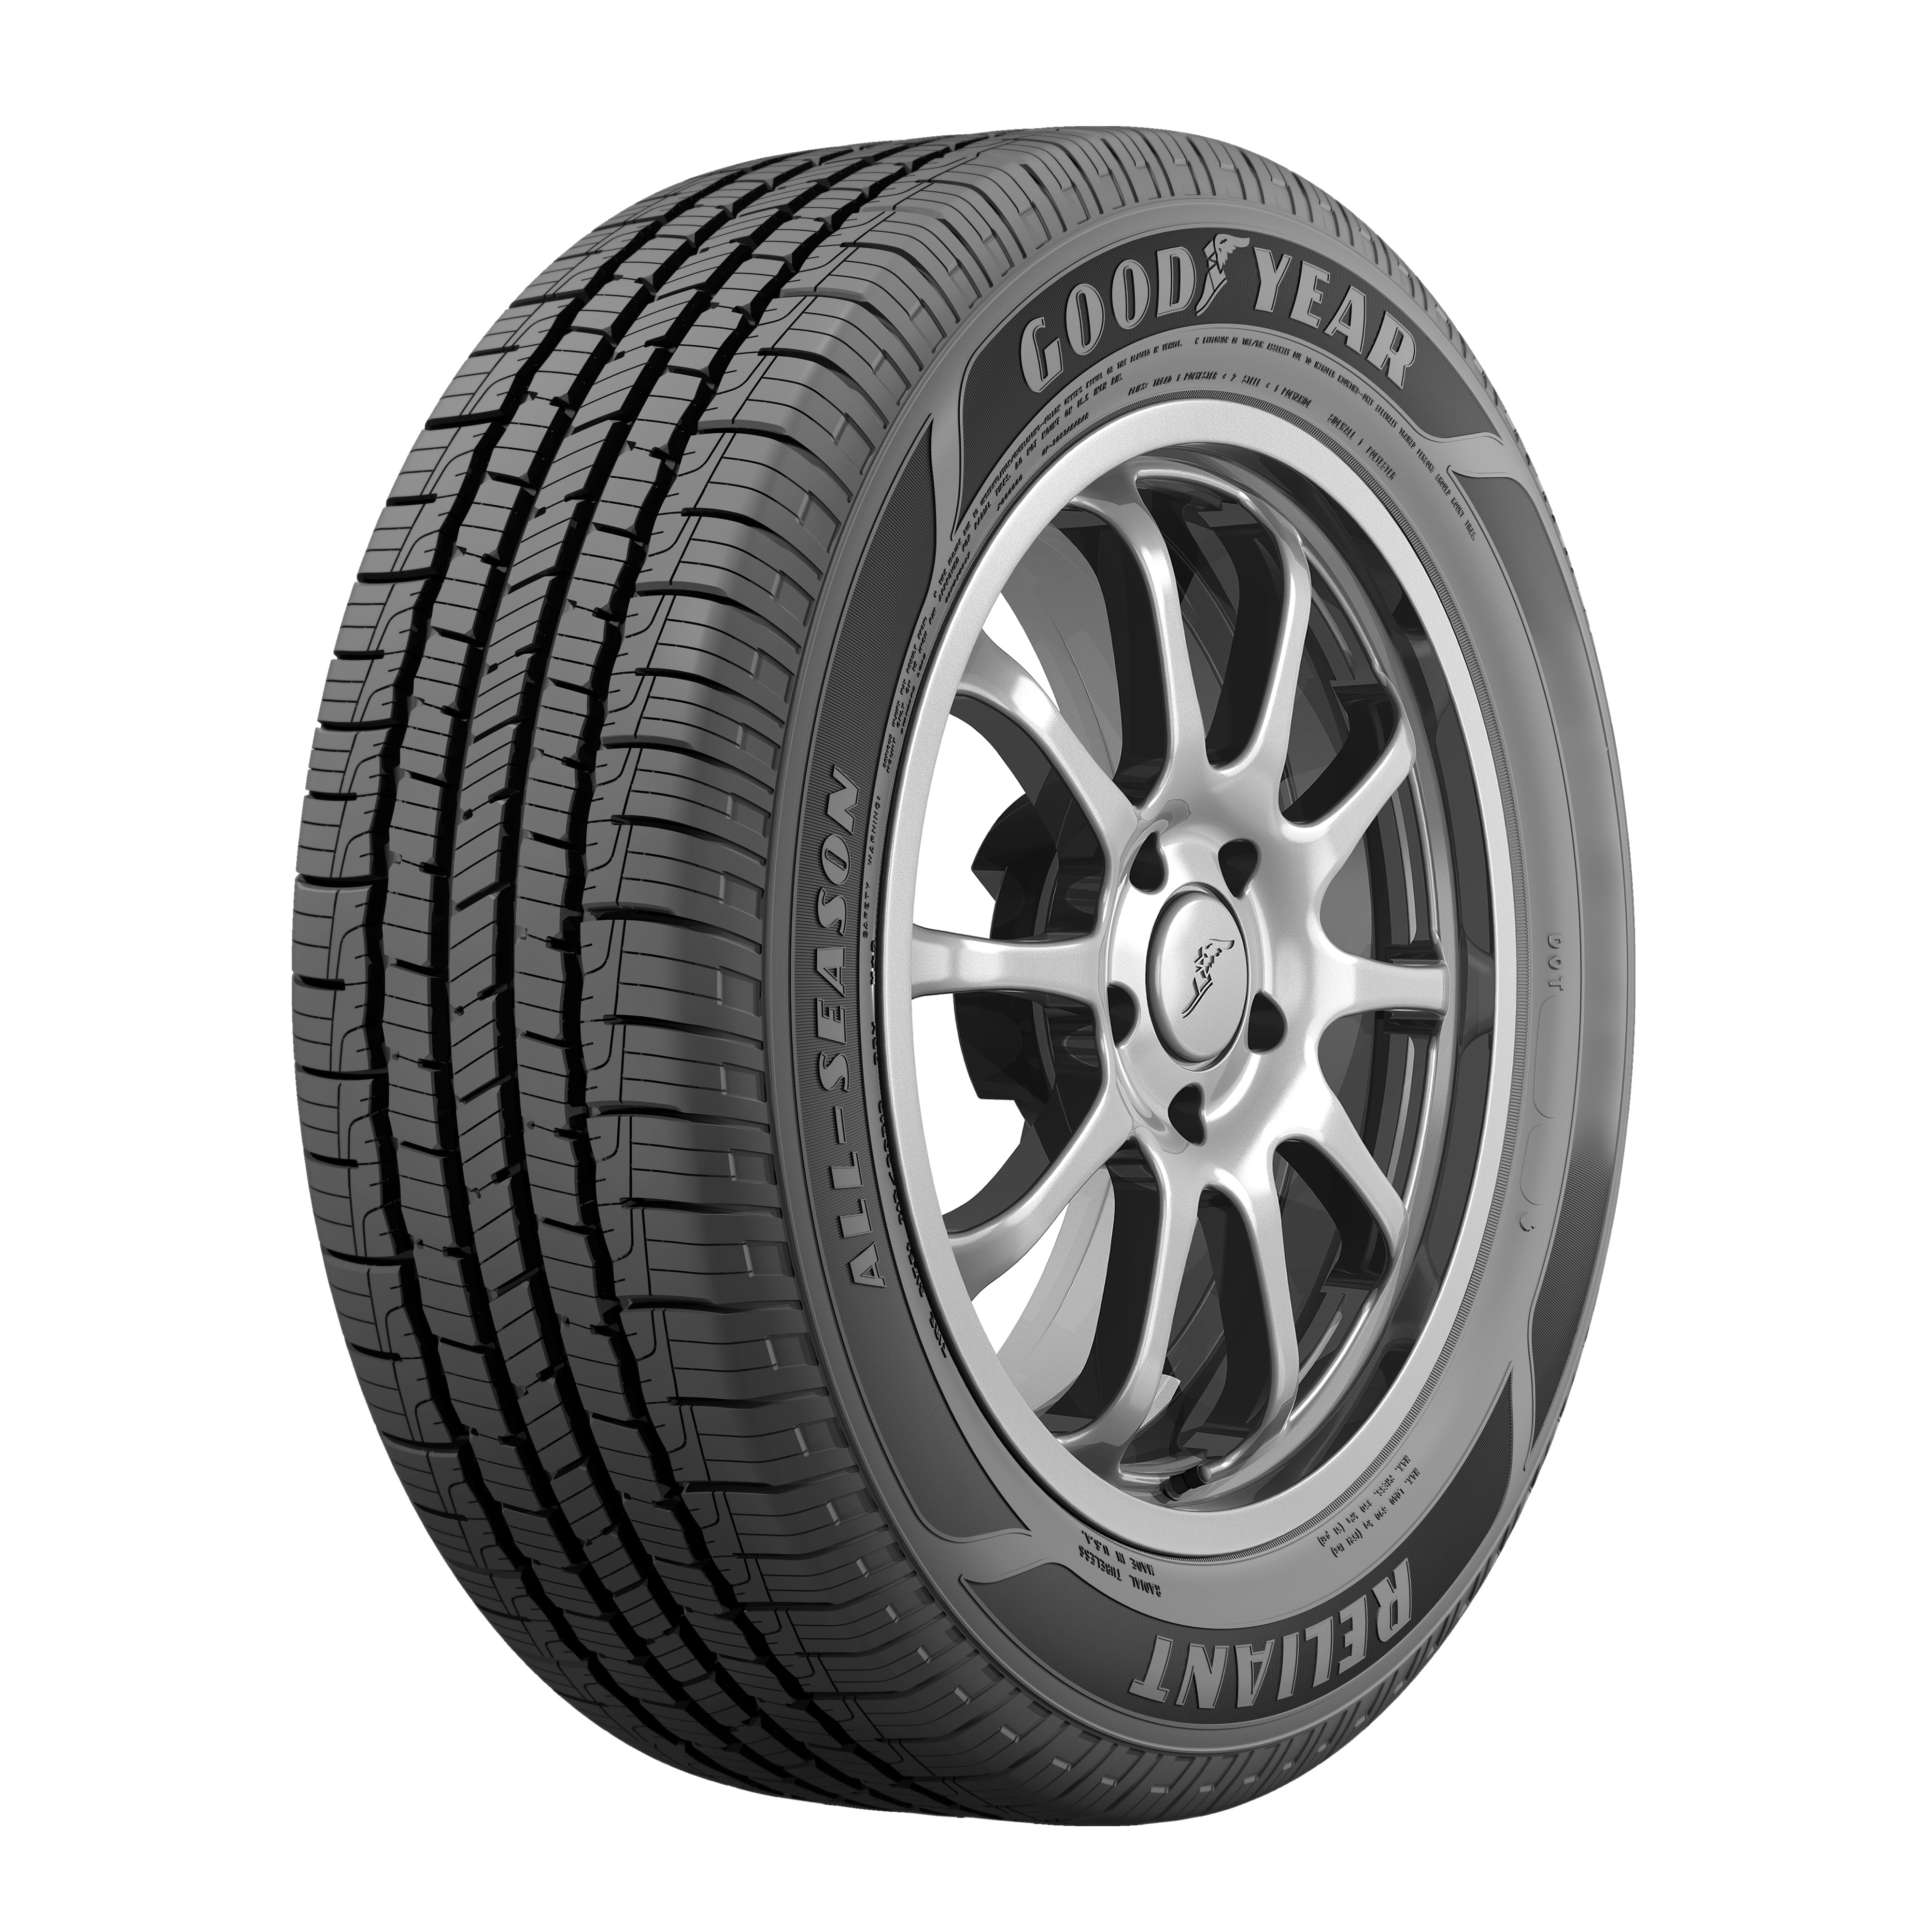 225 45 R 17 x2 DEBICA MADE BY GOODYEAR  91Y 22545R17 BRAND NEW TYRES 